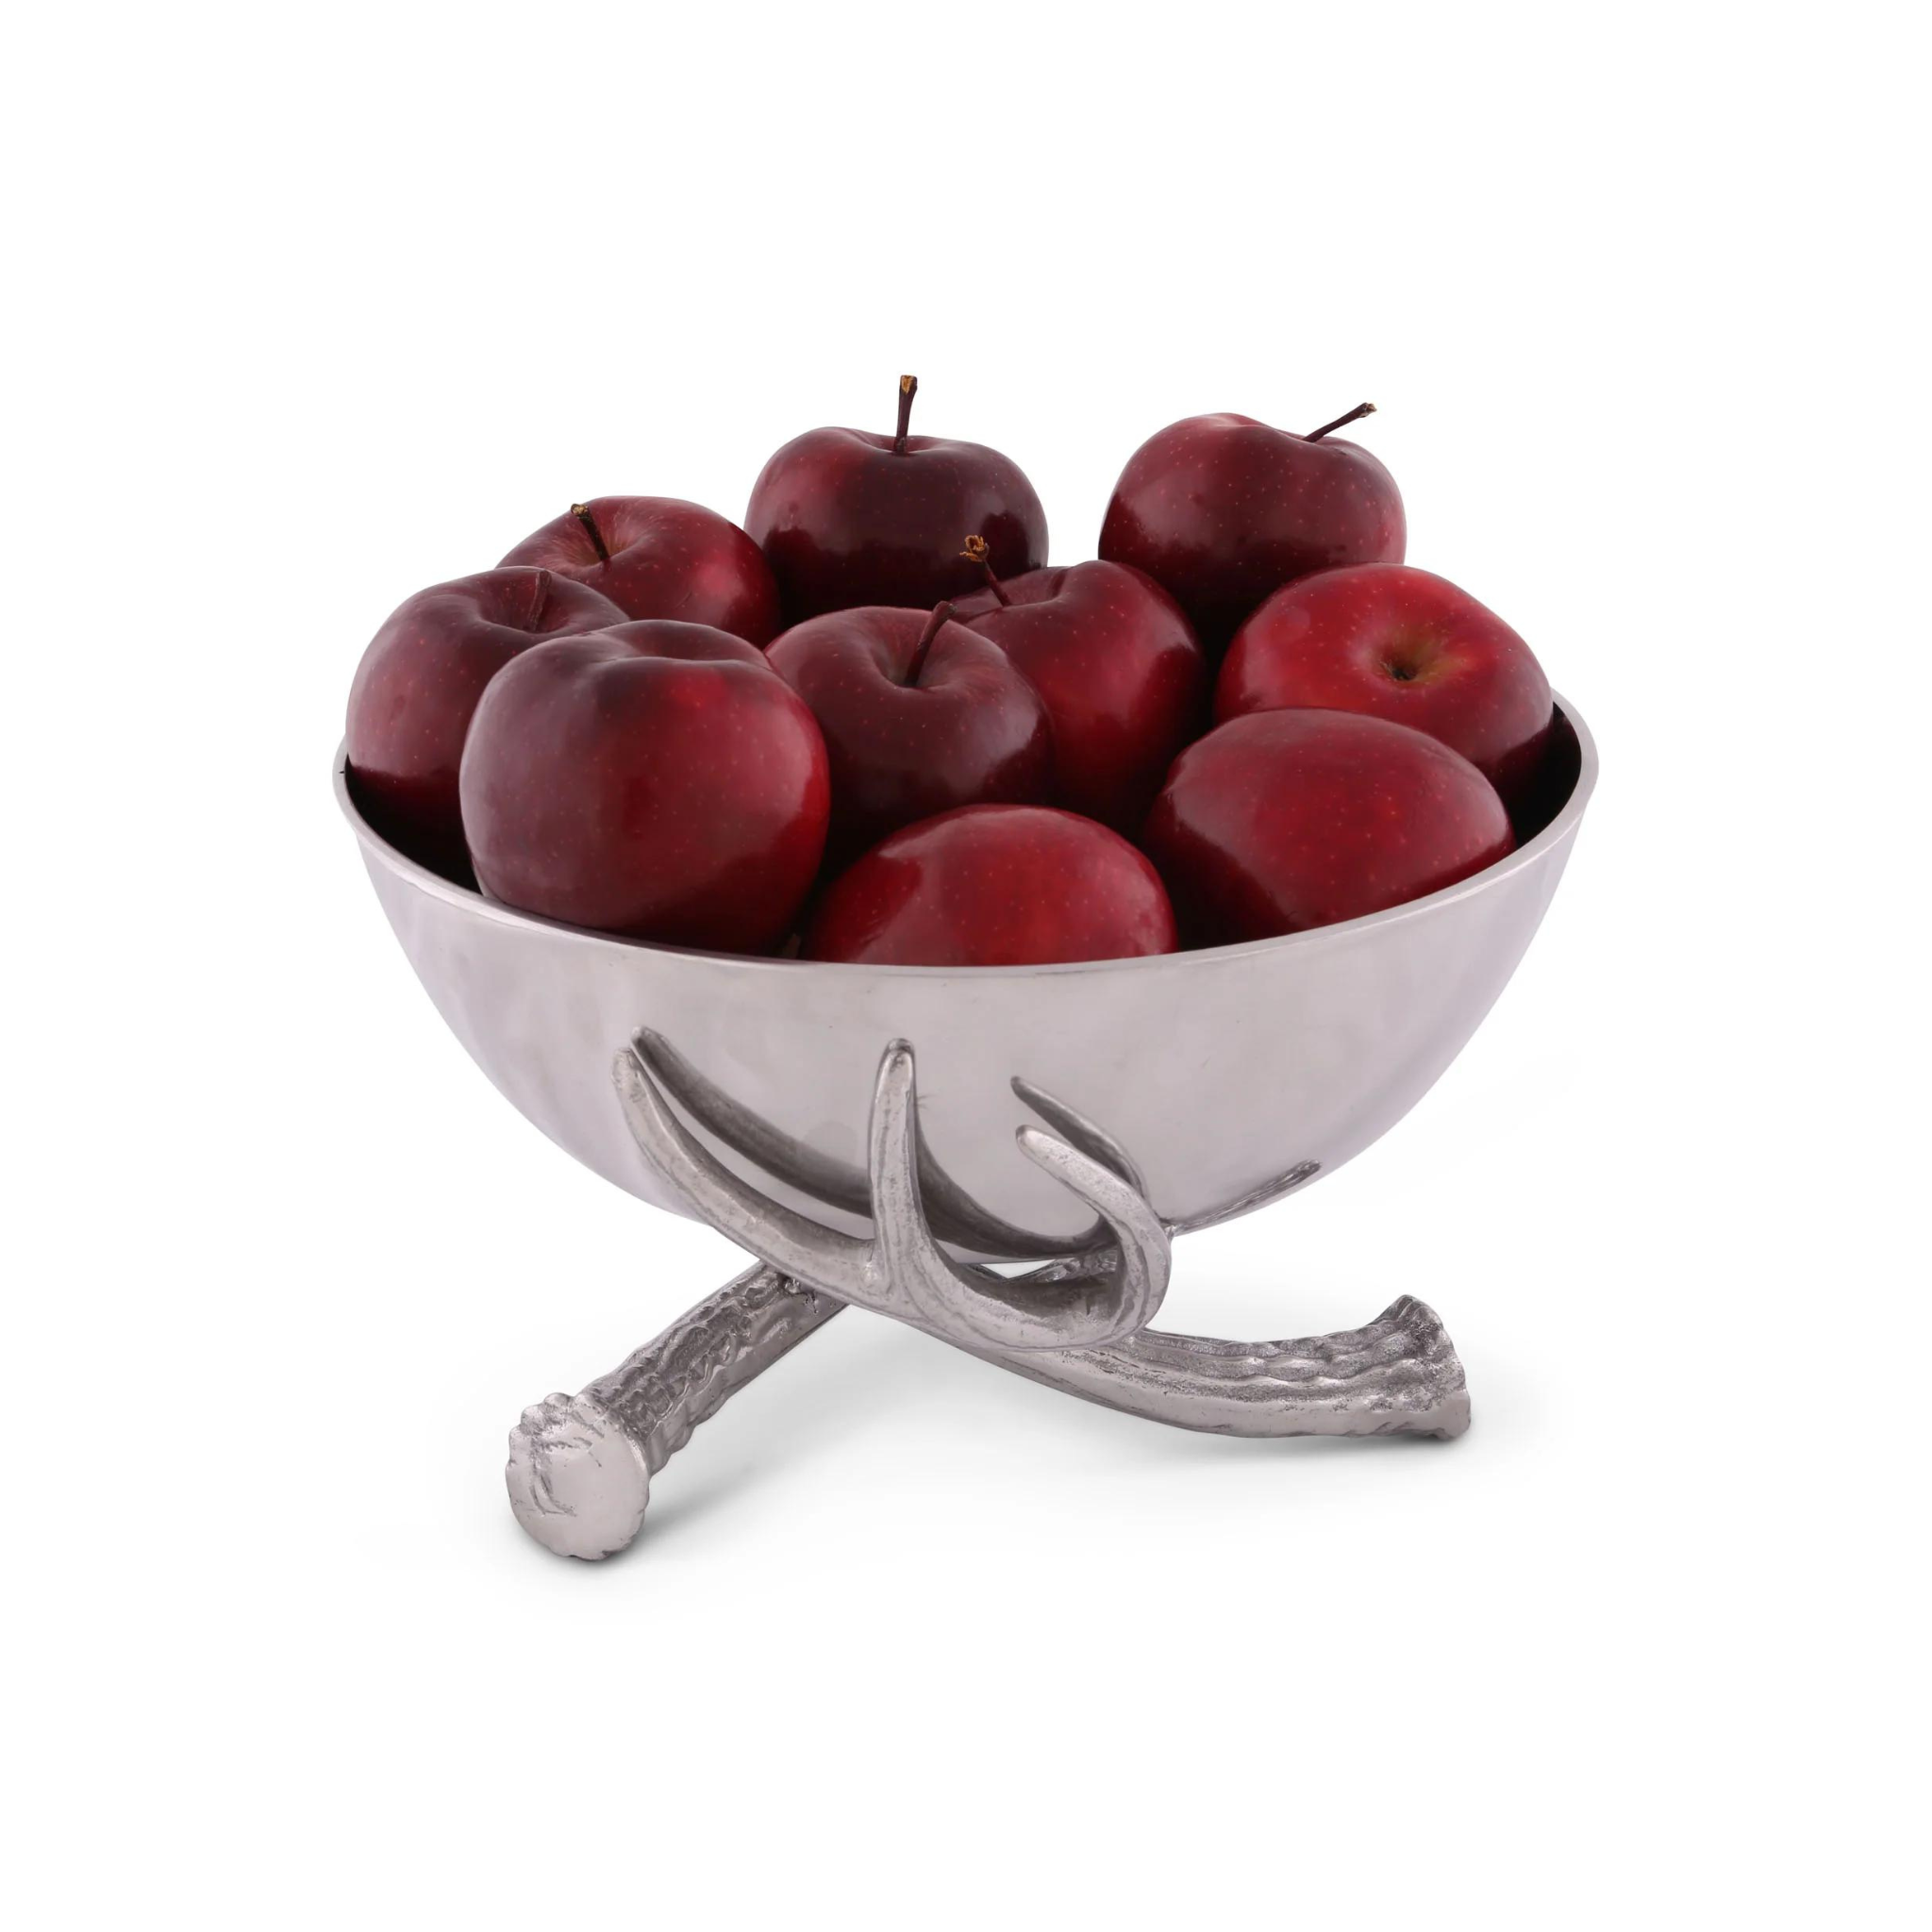 a metal bowl with 3 metal antler base filled with red apples